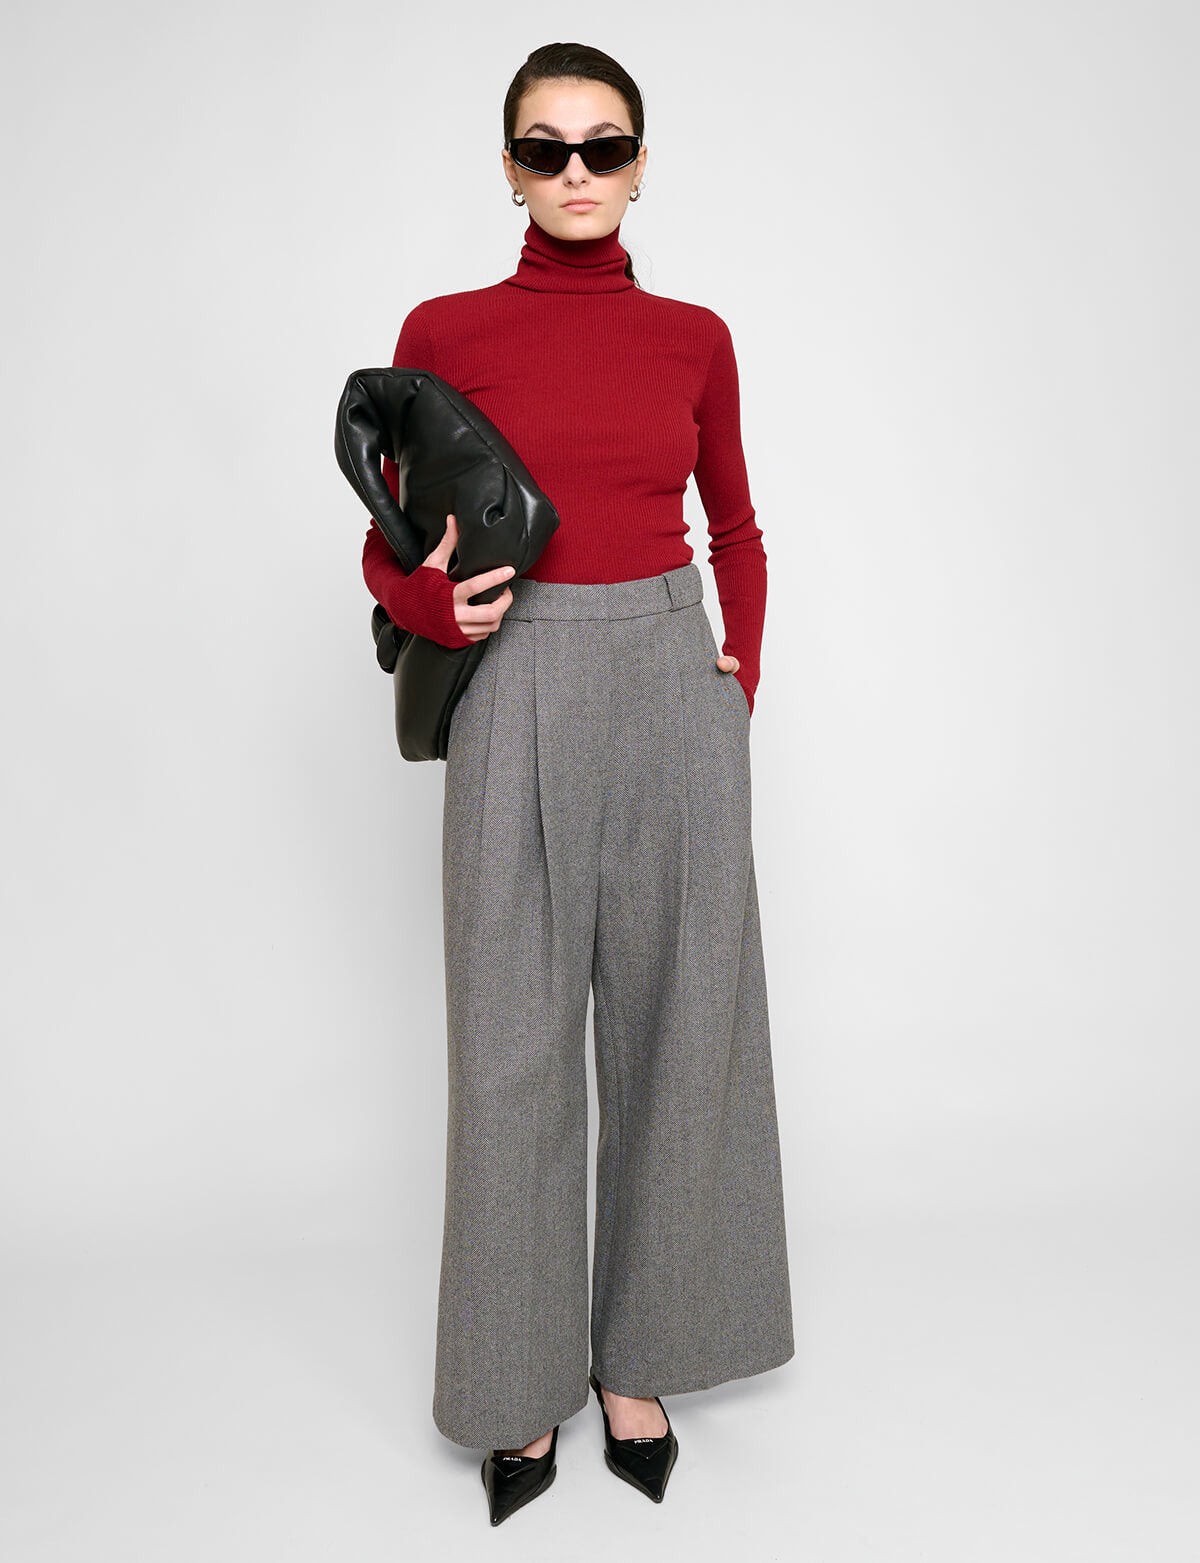 Black Scuba Crepe Flared Trousers New Look | £19.99 | Cabot Circus